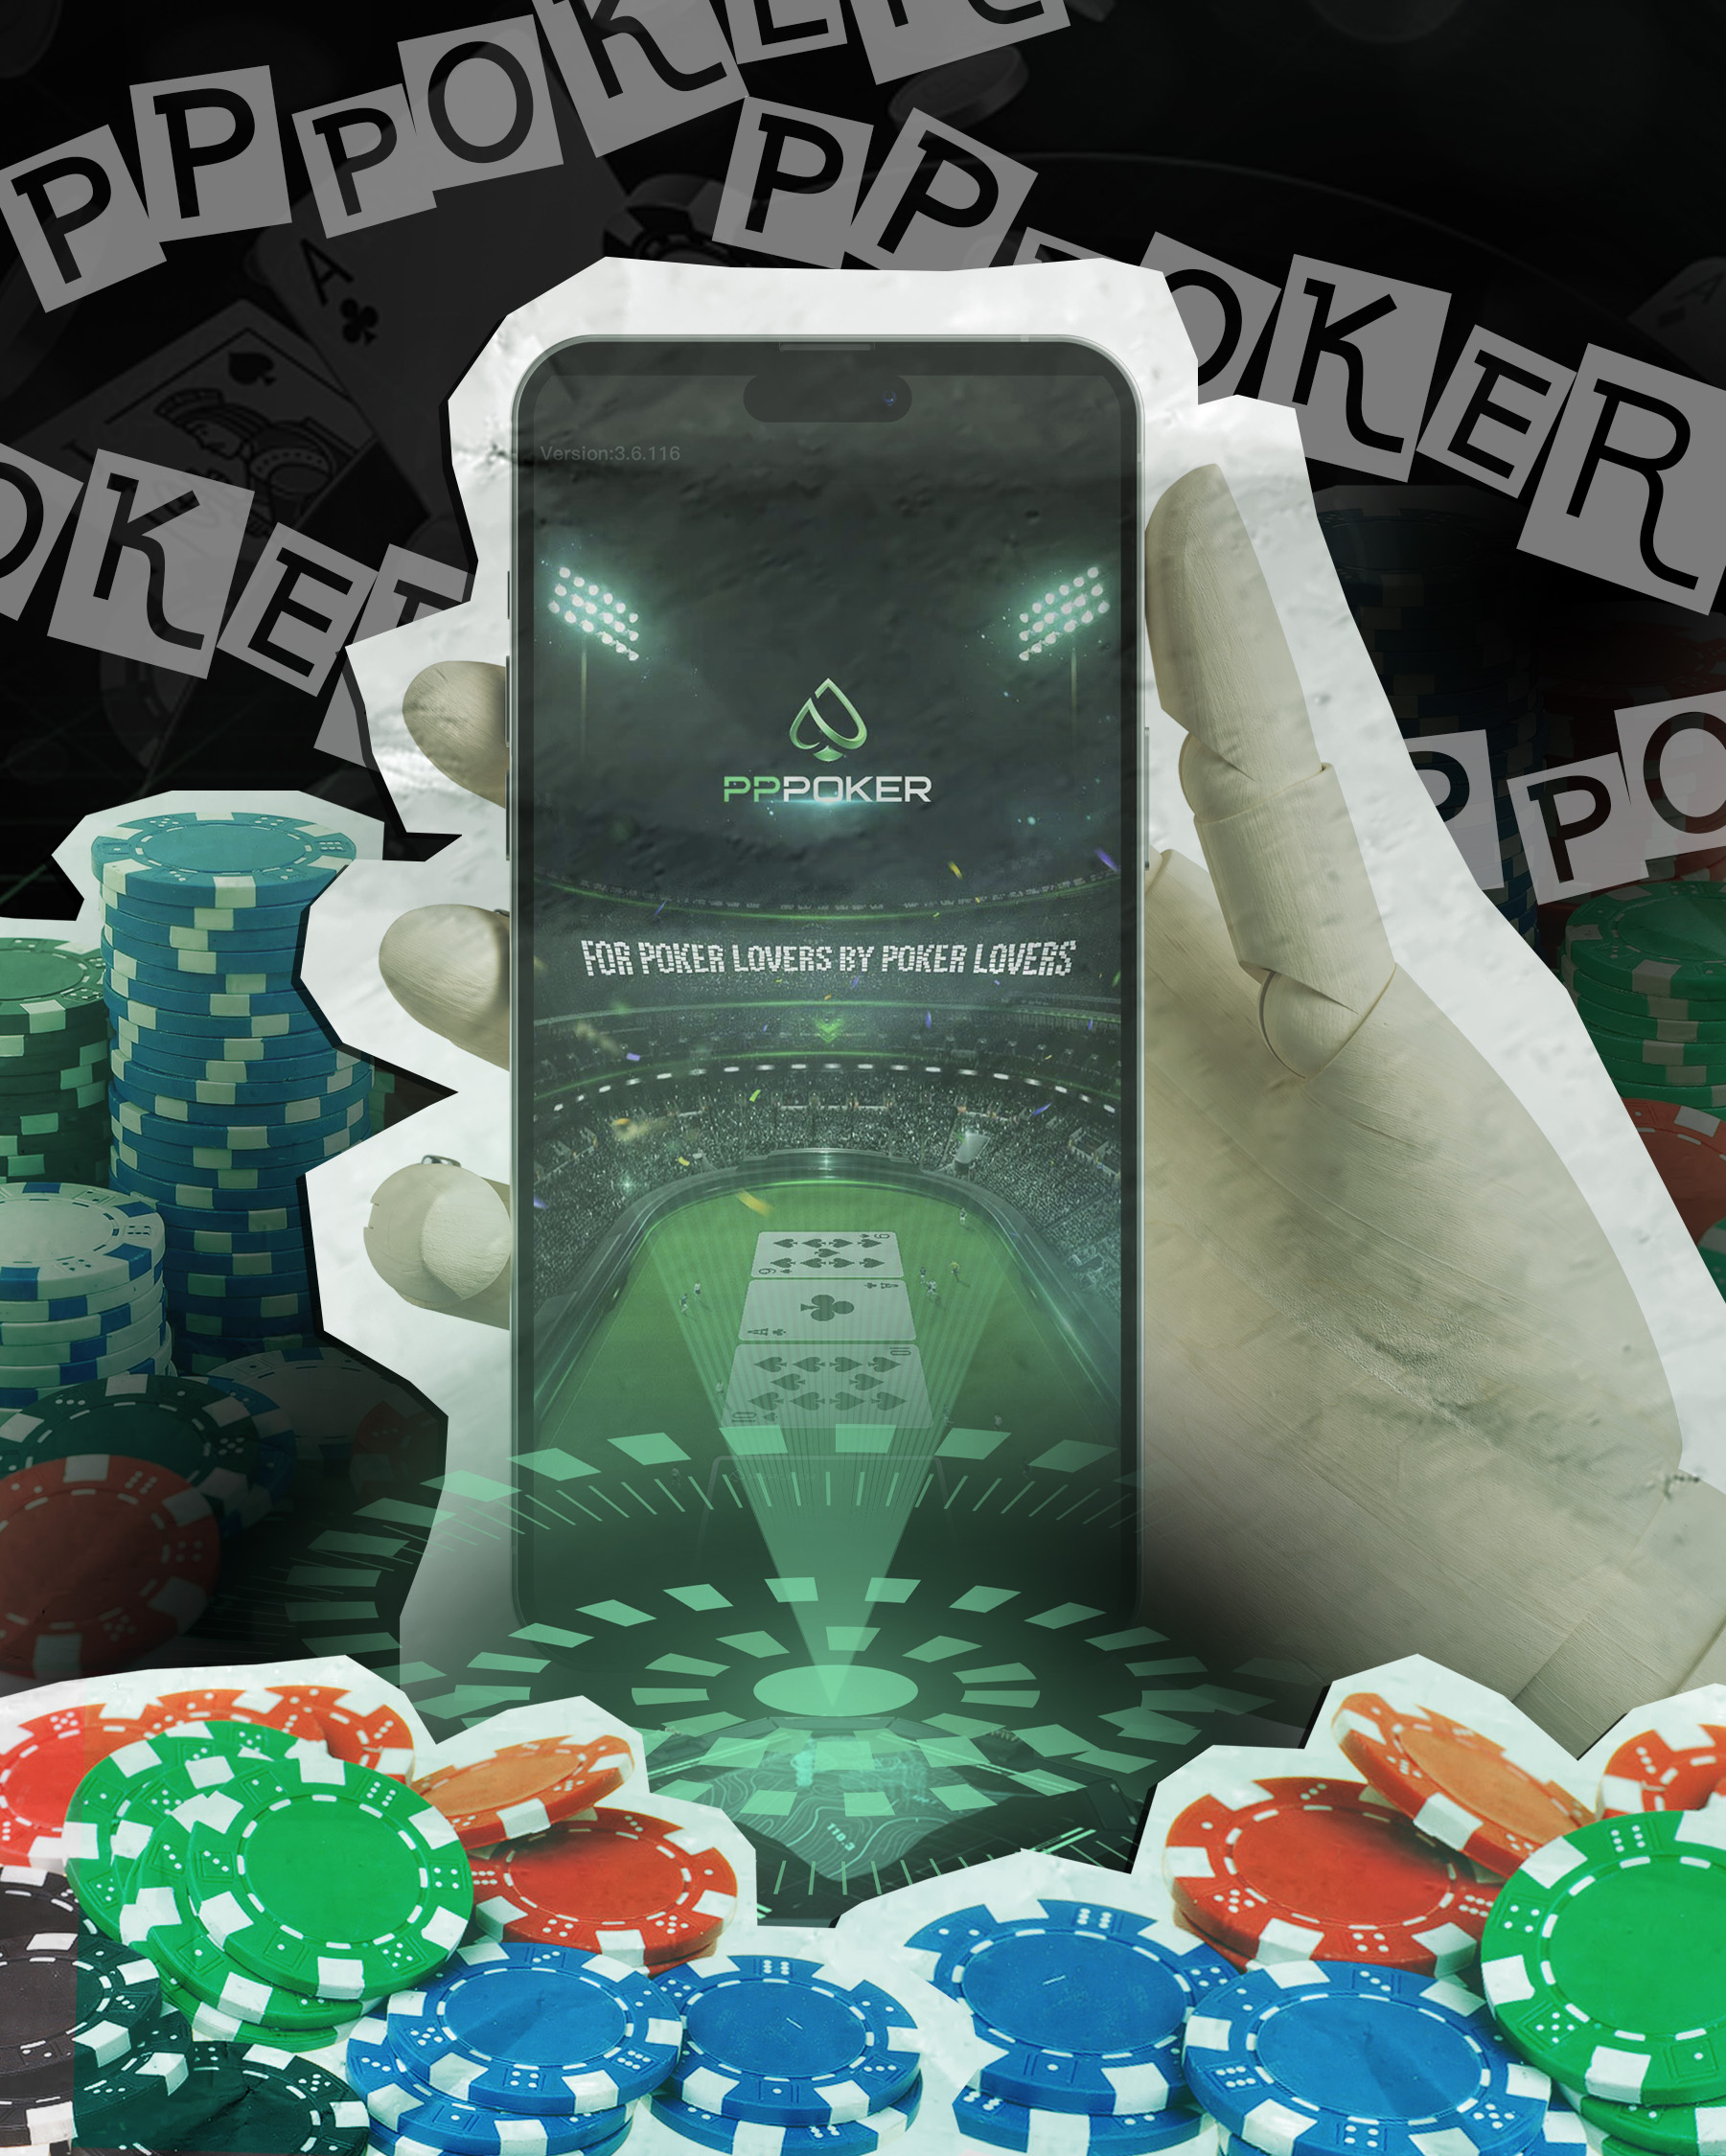 How to download and install PPPoker on Android and iOS